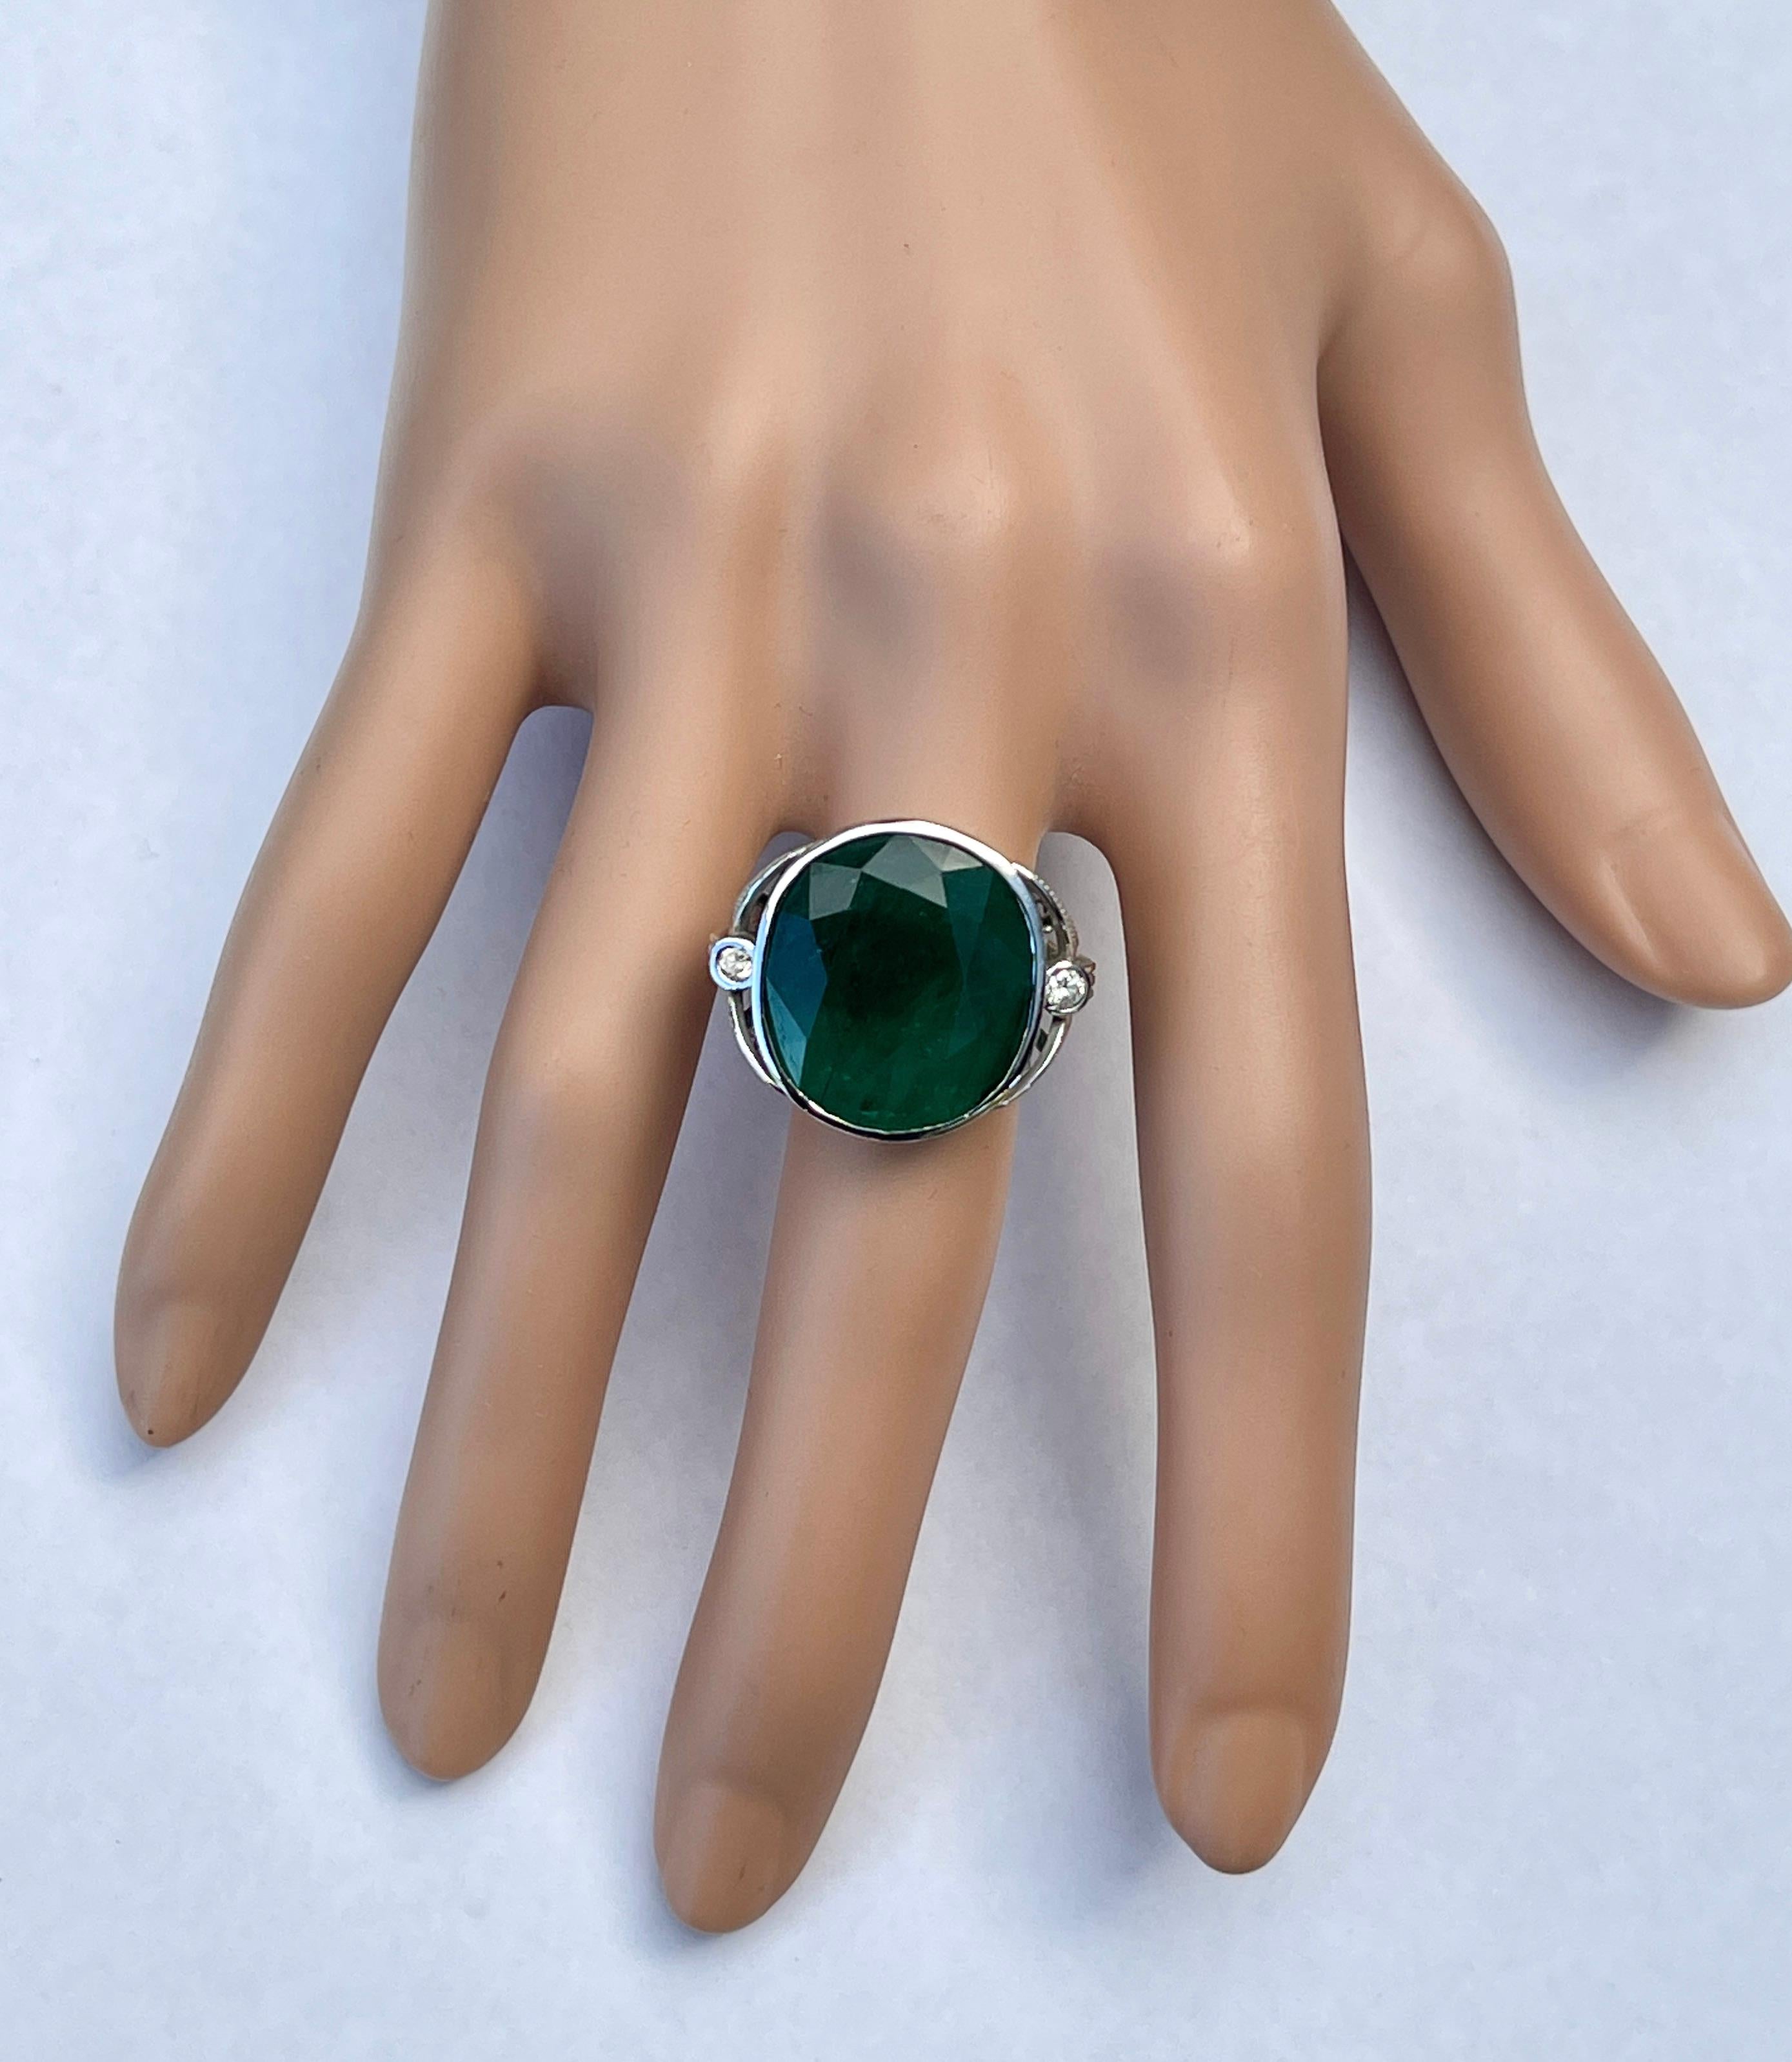 Amazing Huge 20CT Natural Emerald Diamond Ring 9ct White Gold with Valuation For Sale 6